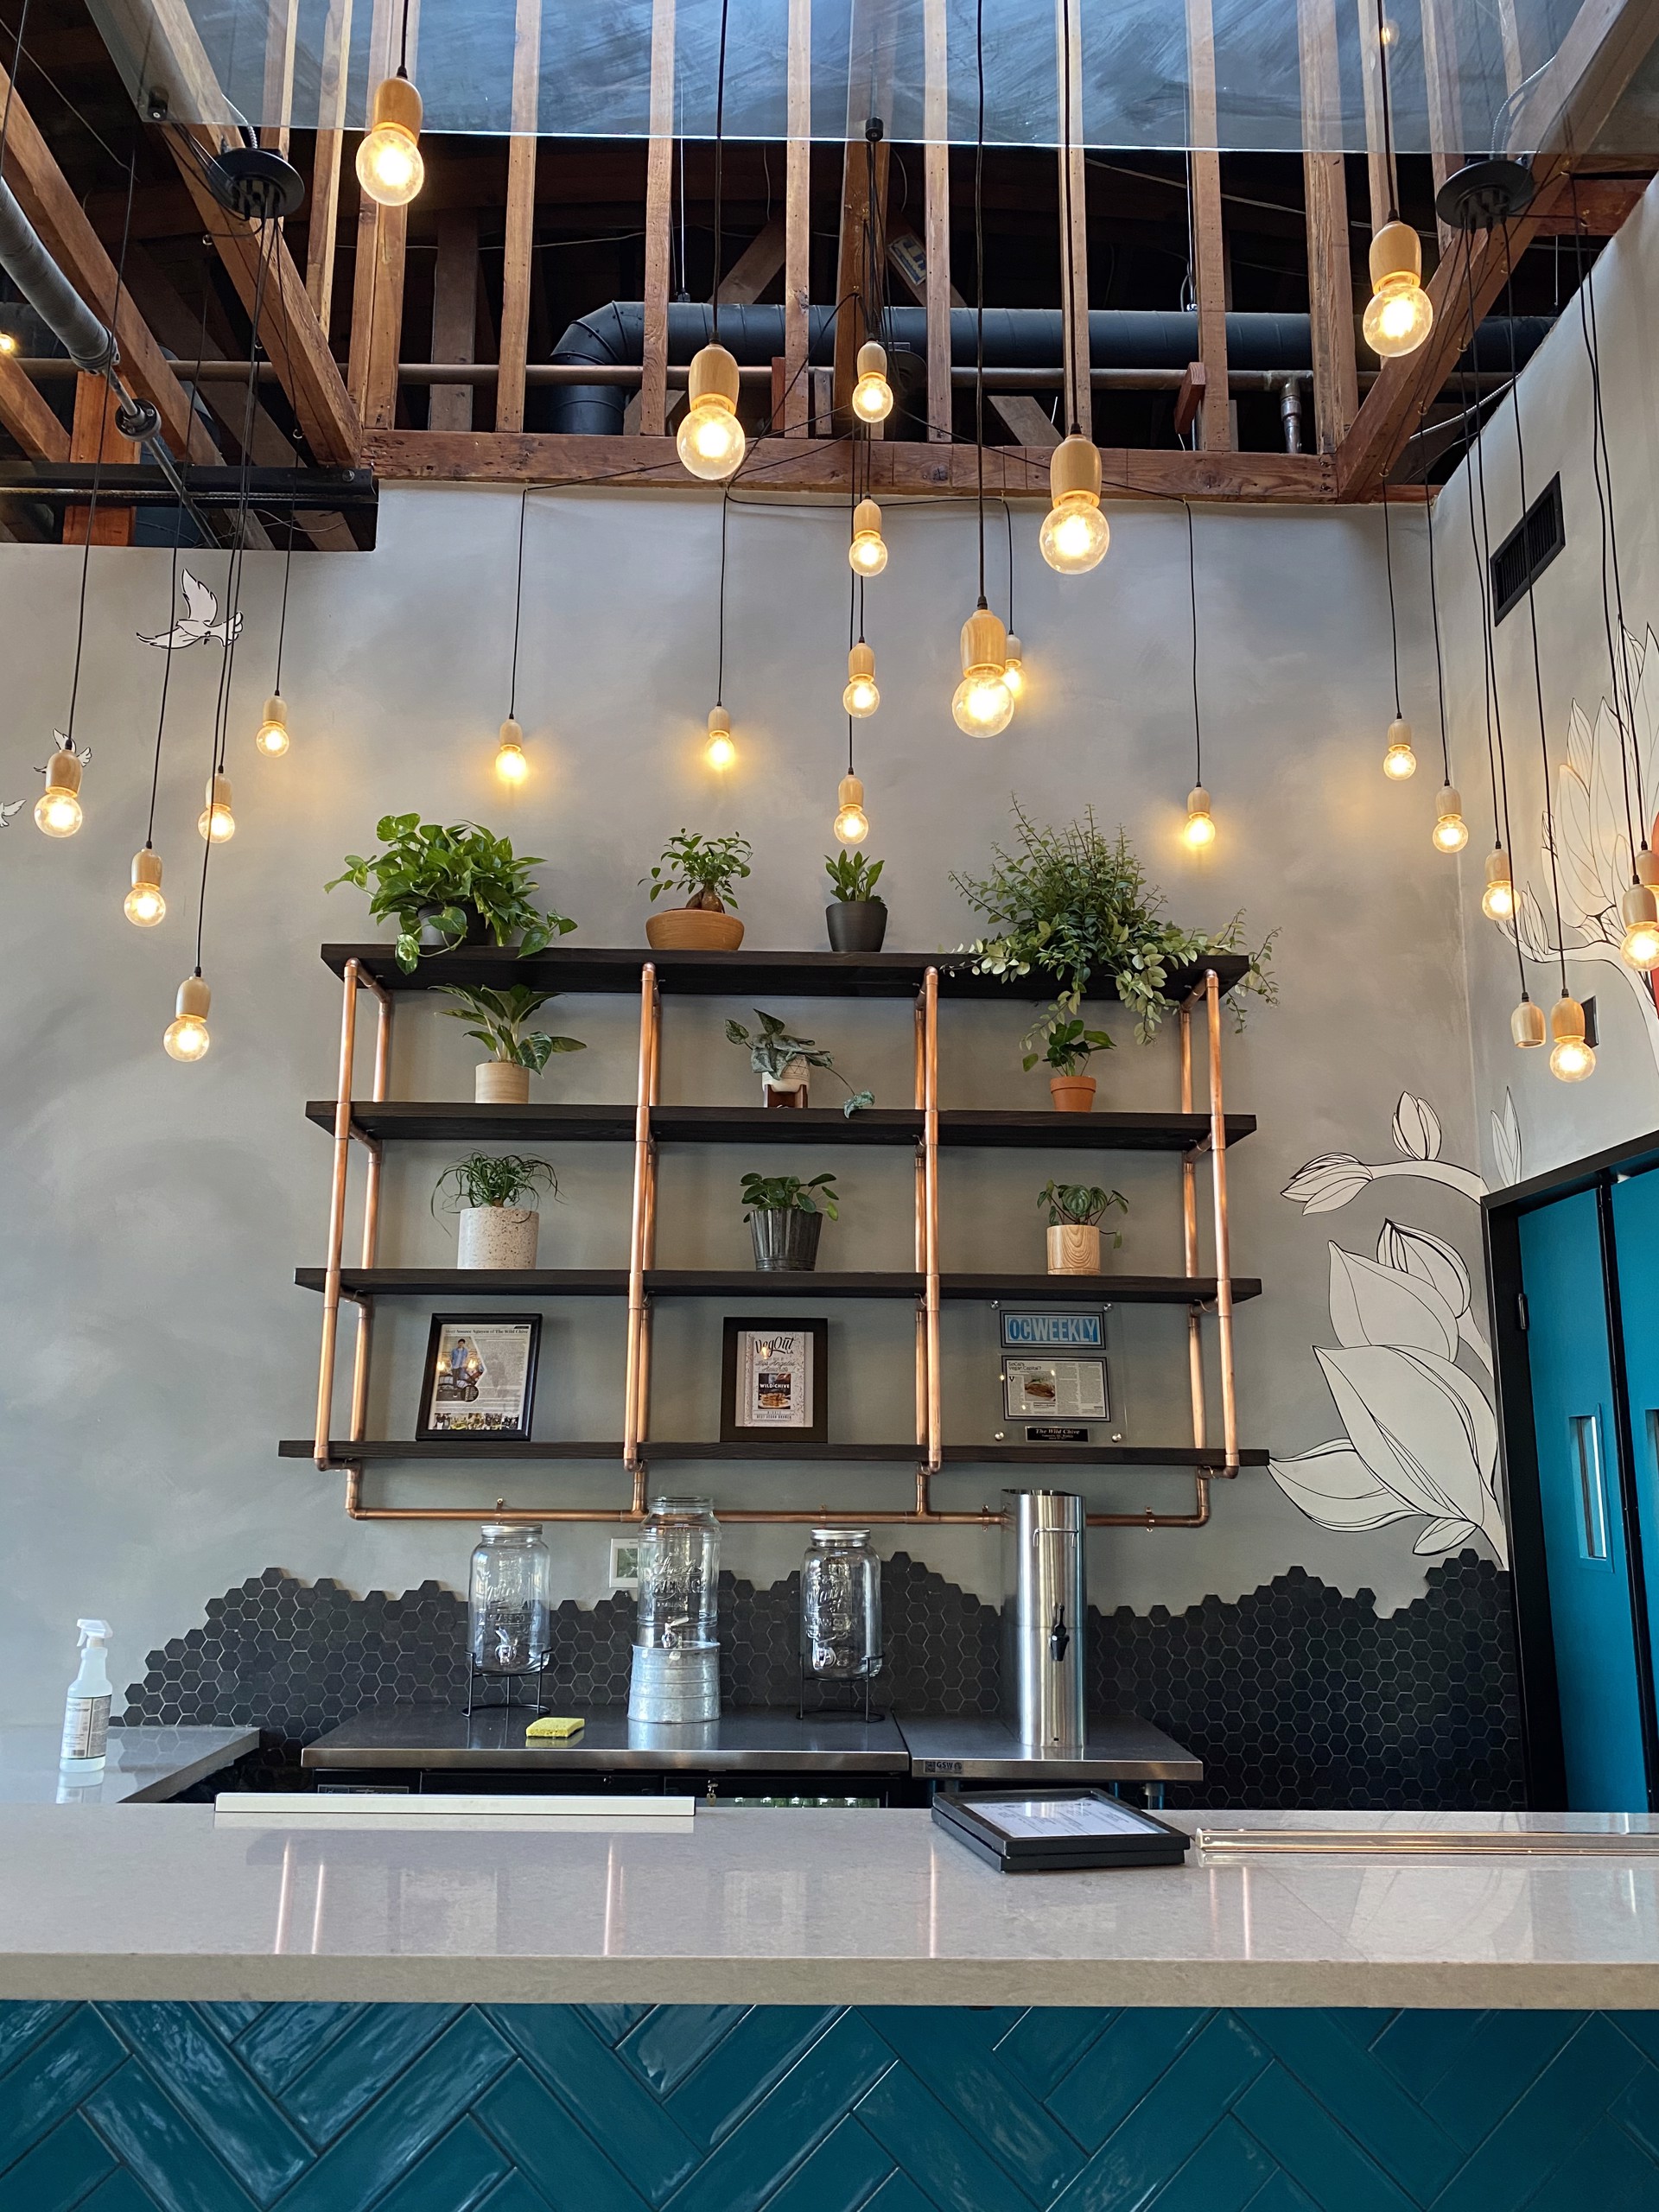 "Dreamy Gray Textured Walls" The Wild Chive, Long Beach CA by Melissa DeTroy